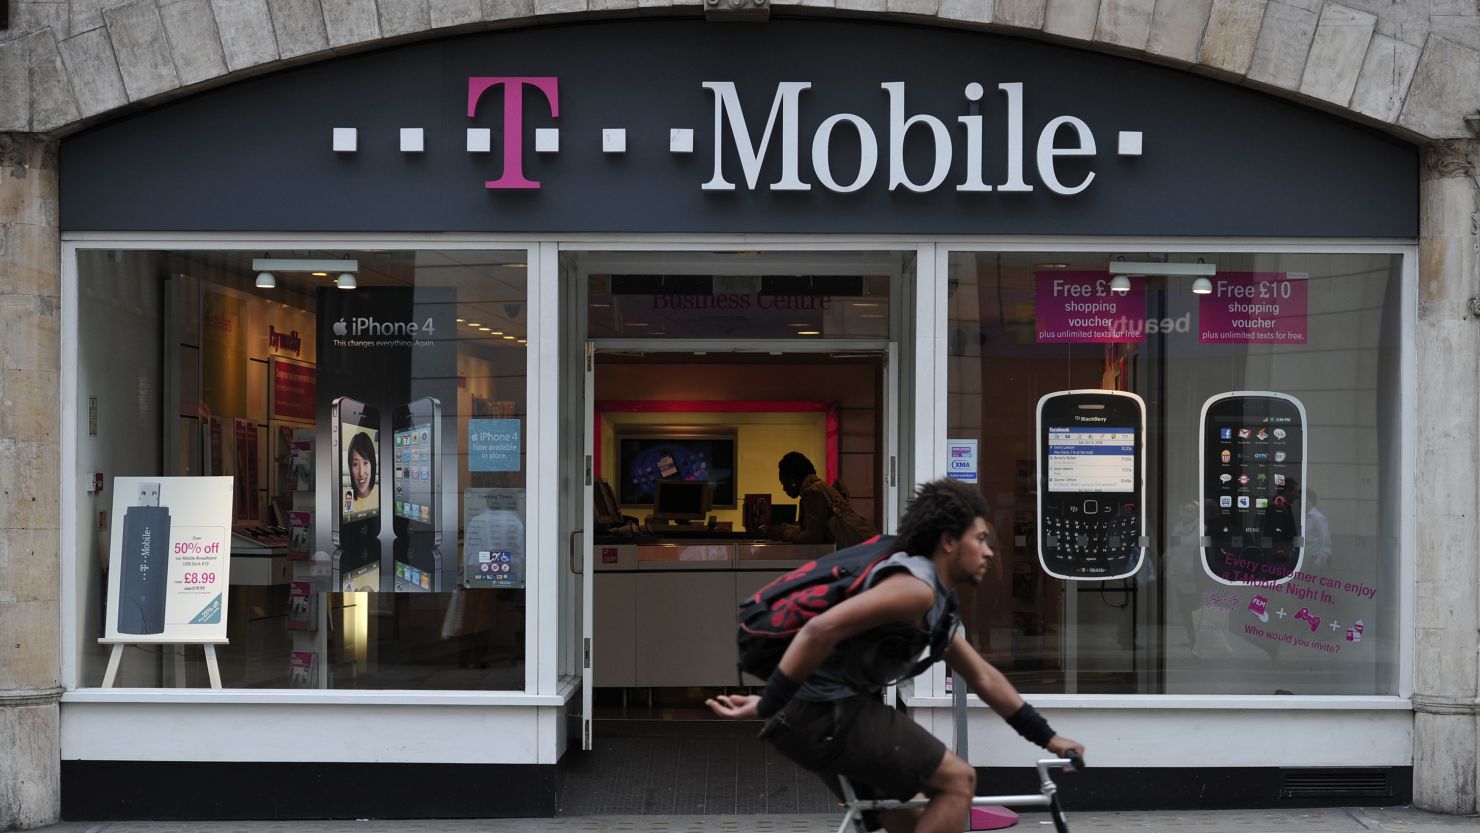 A biker rides past a T-Mobile store in London.